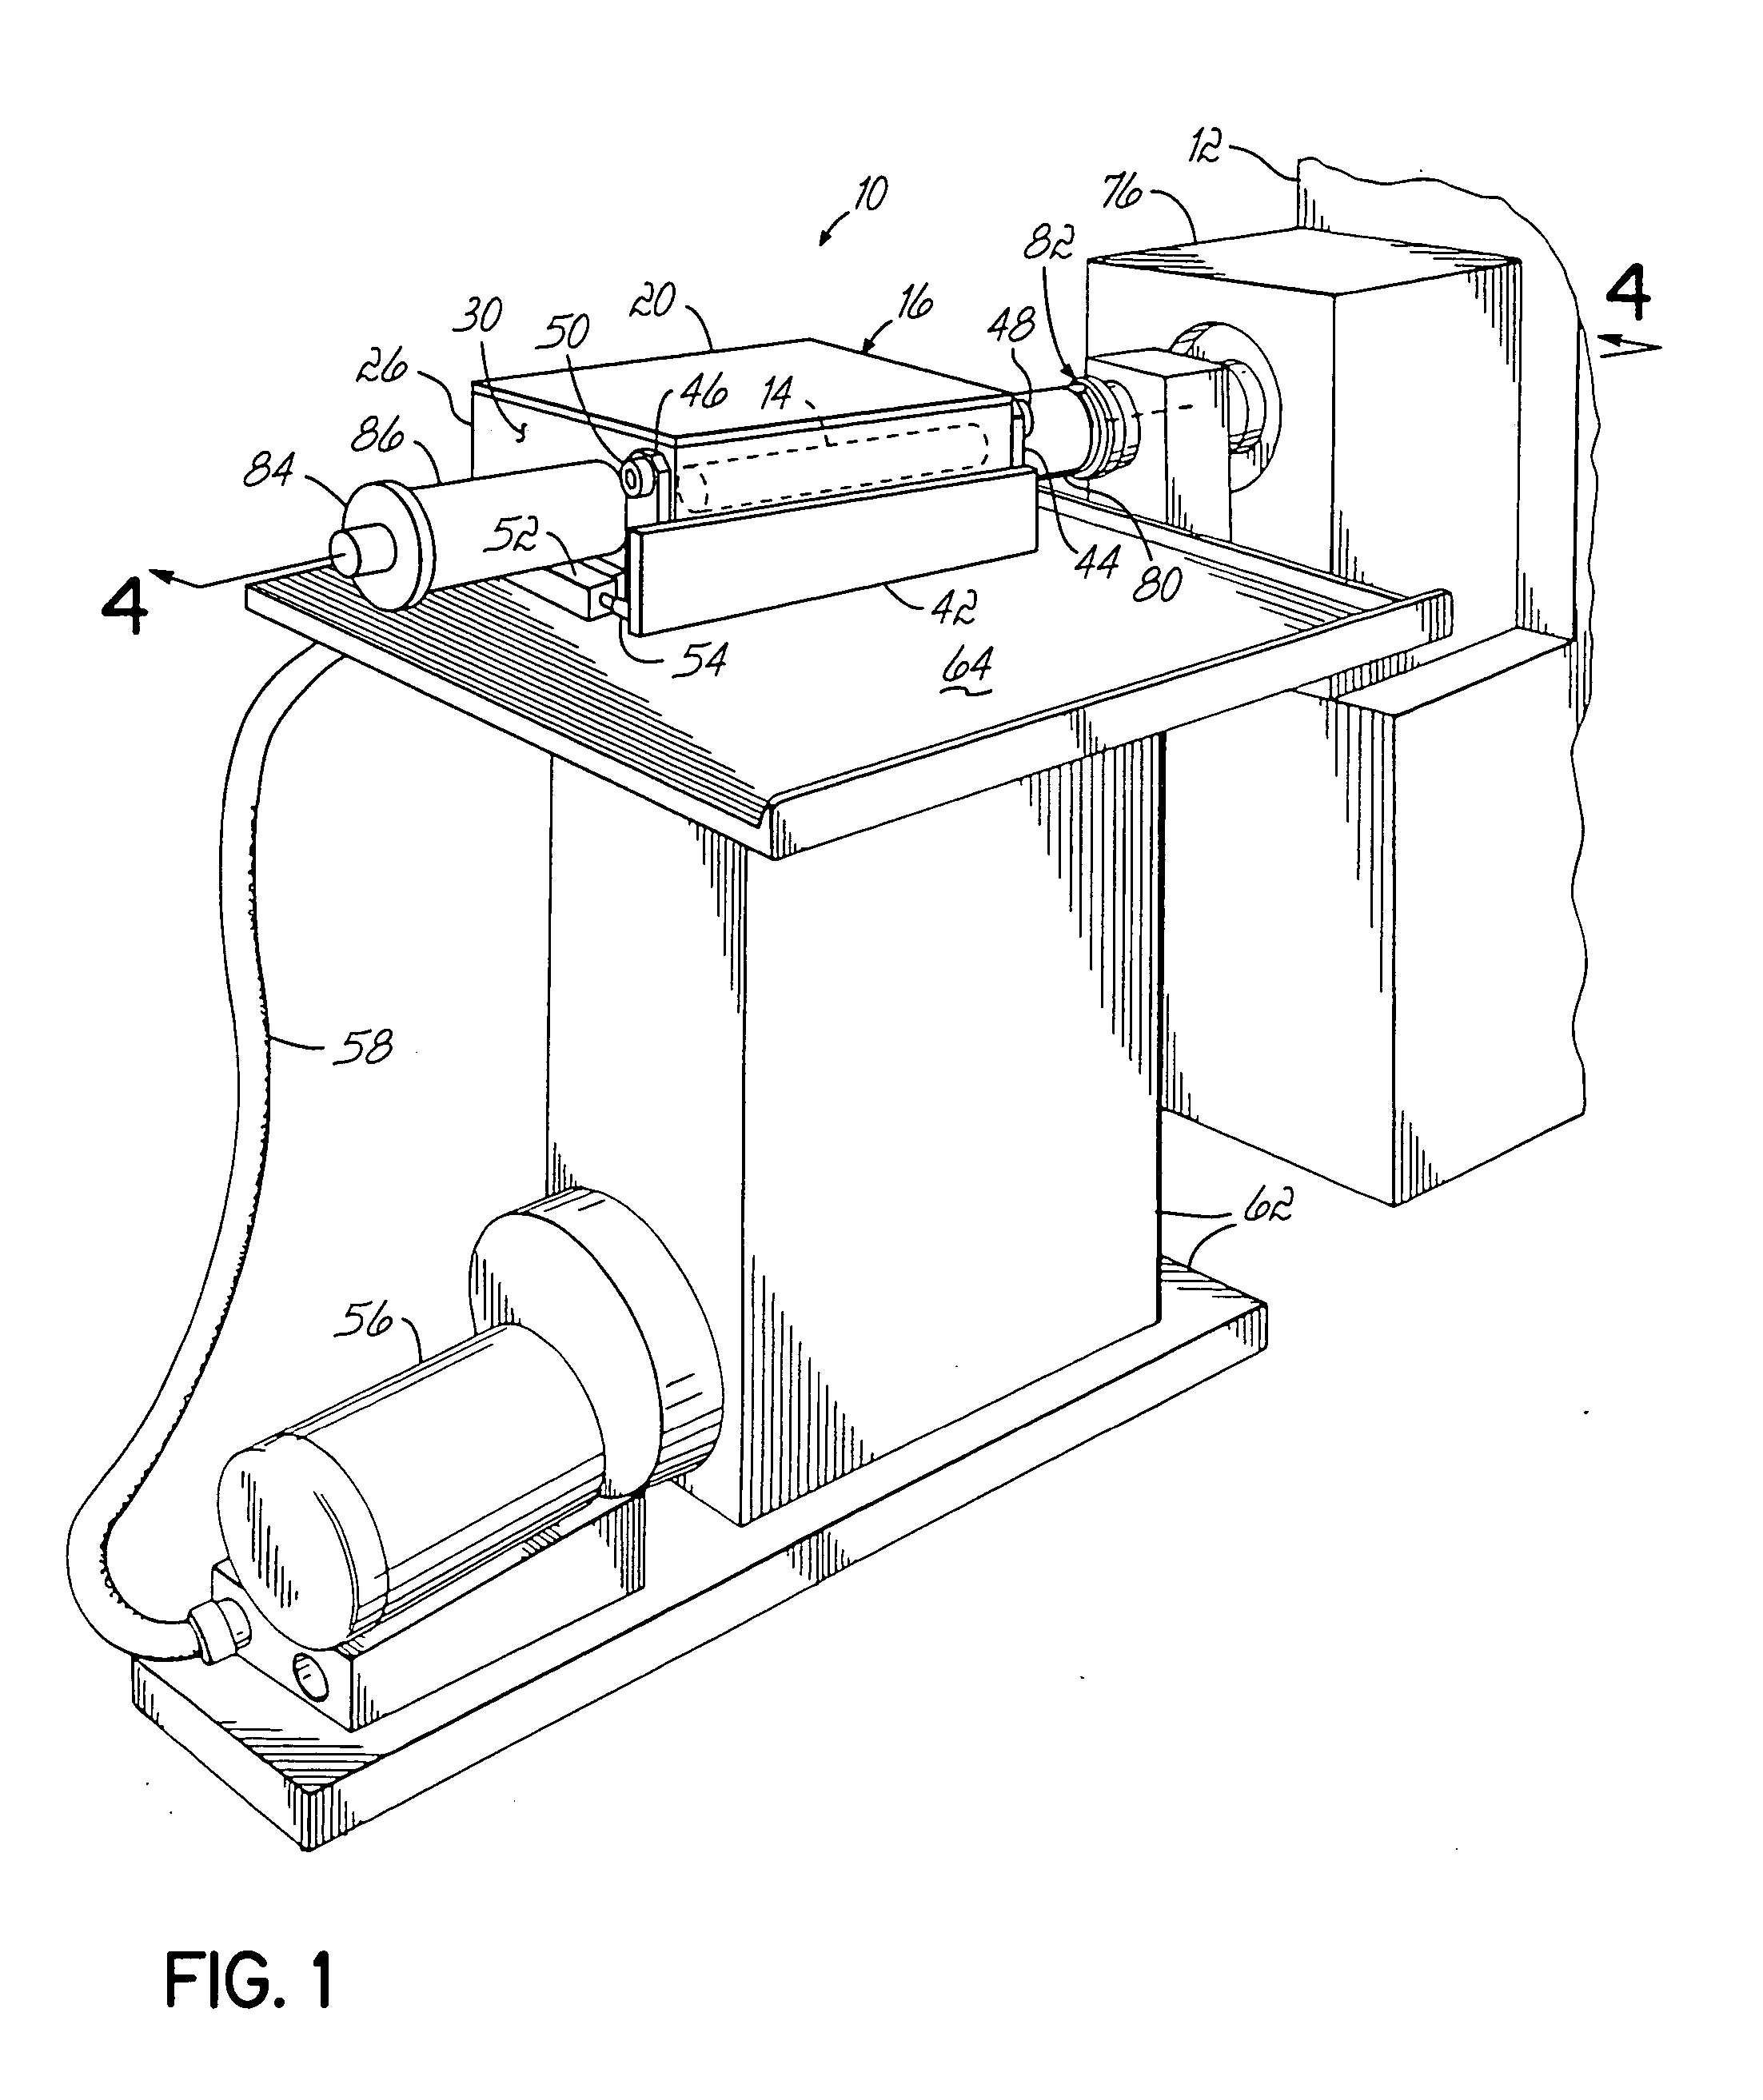 Air operated unloading device